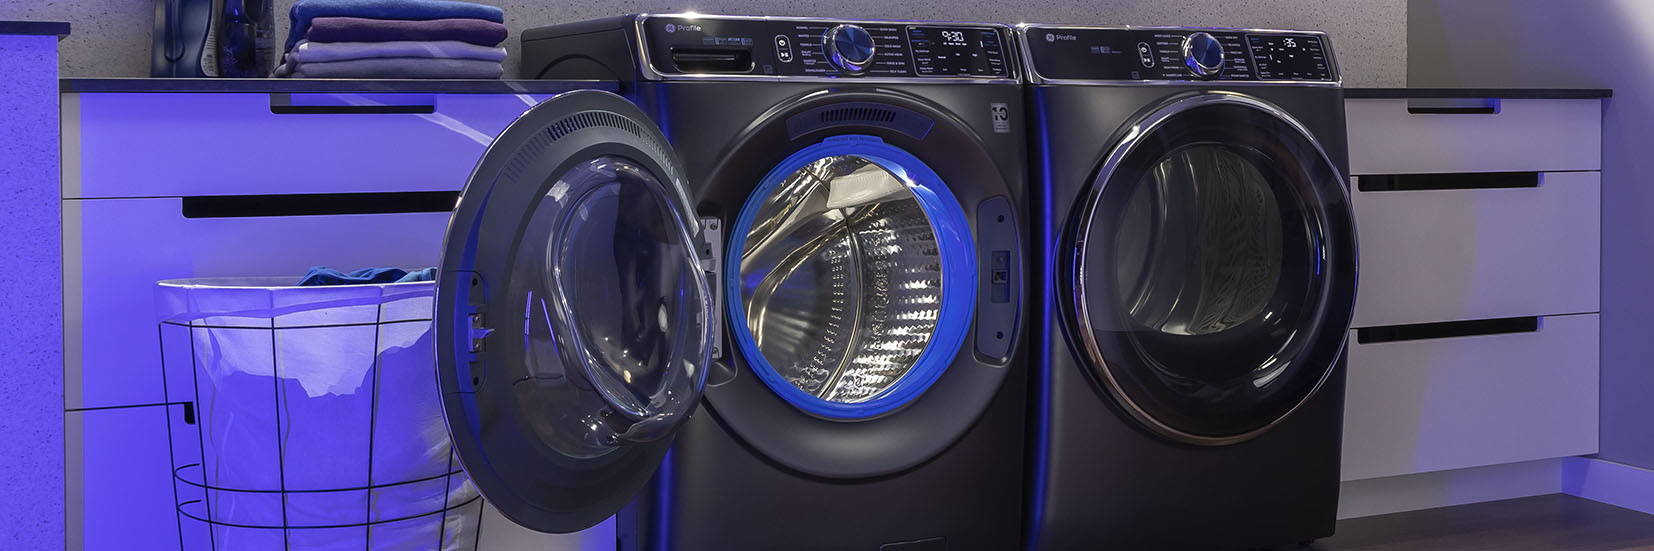 GE Profile Front load washer and dryer with washer door open, showcasing microban blue gasket.